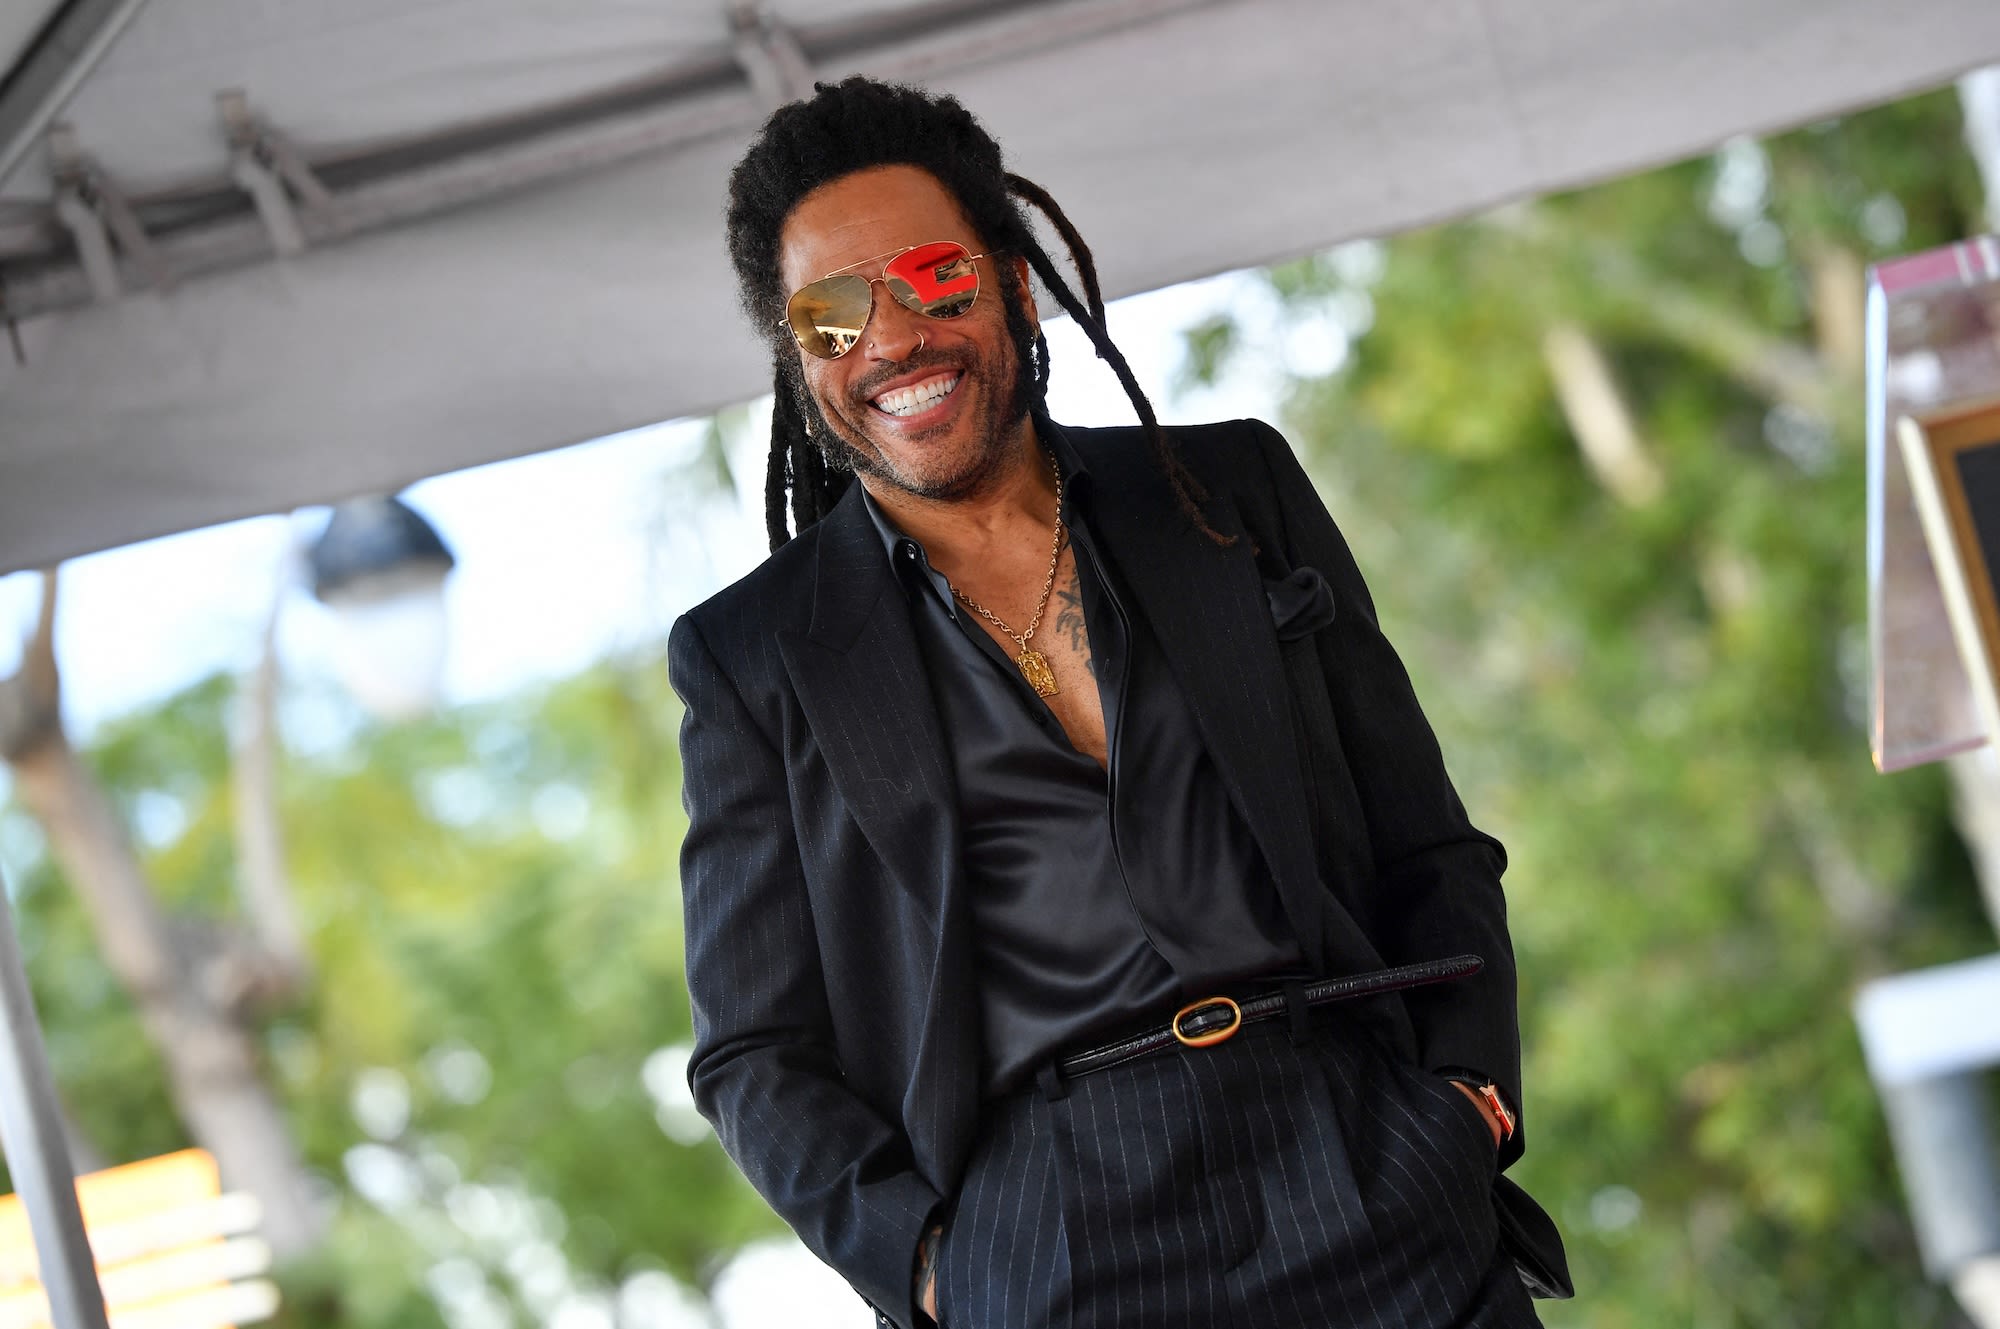 Lenny Kravitz Hasn’t Had a Serious Relationship for 9 Years, Still Committed to Celibacy